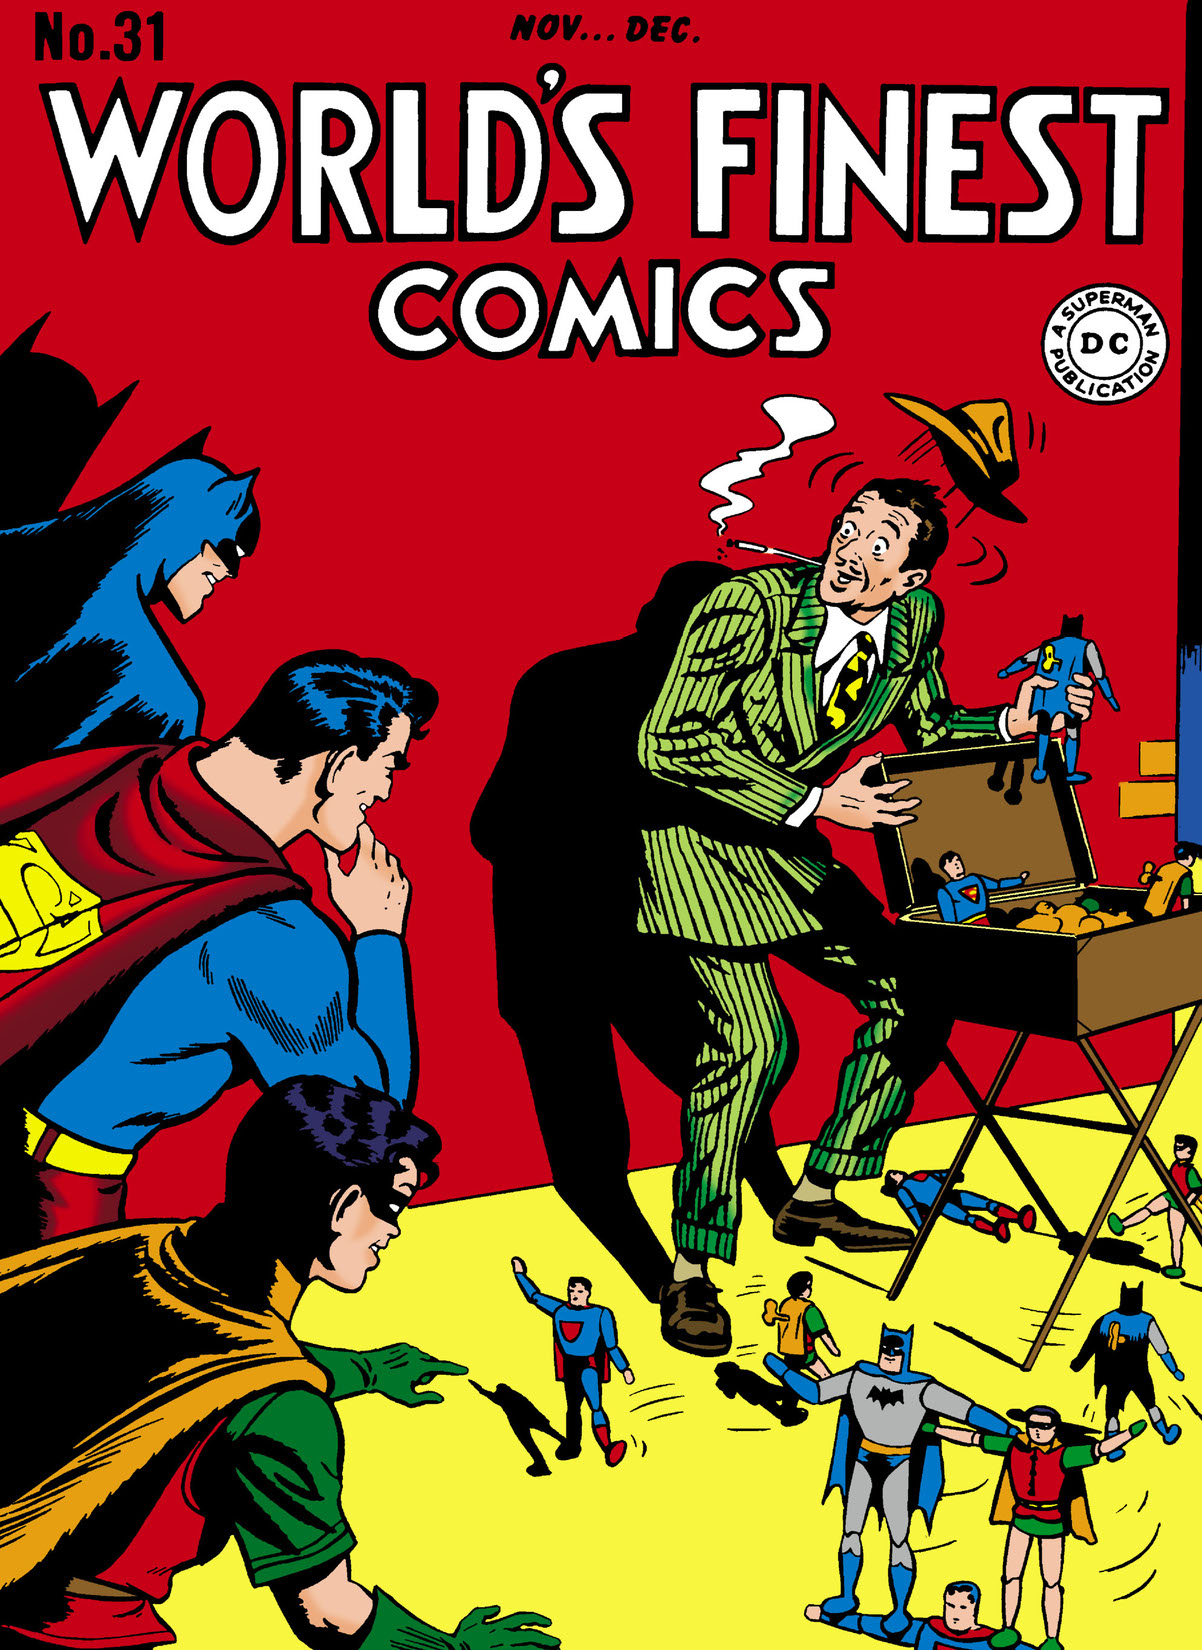 World's Finest Comics (1941-) #31 preview images